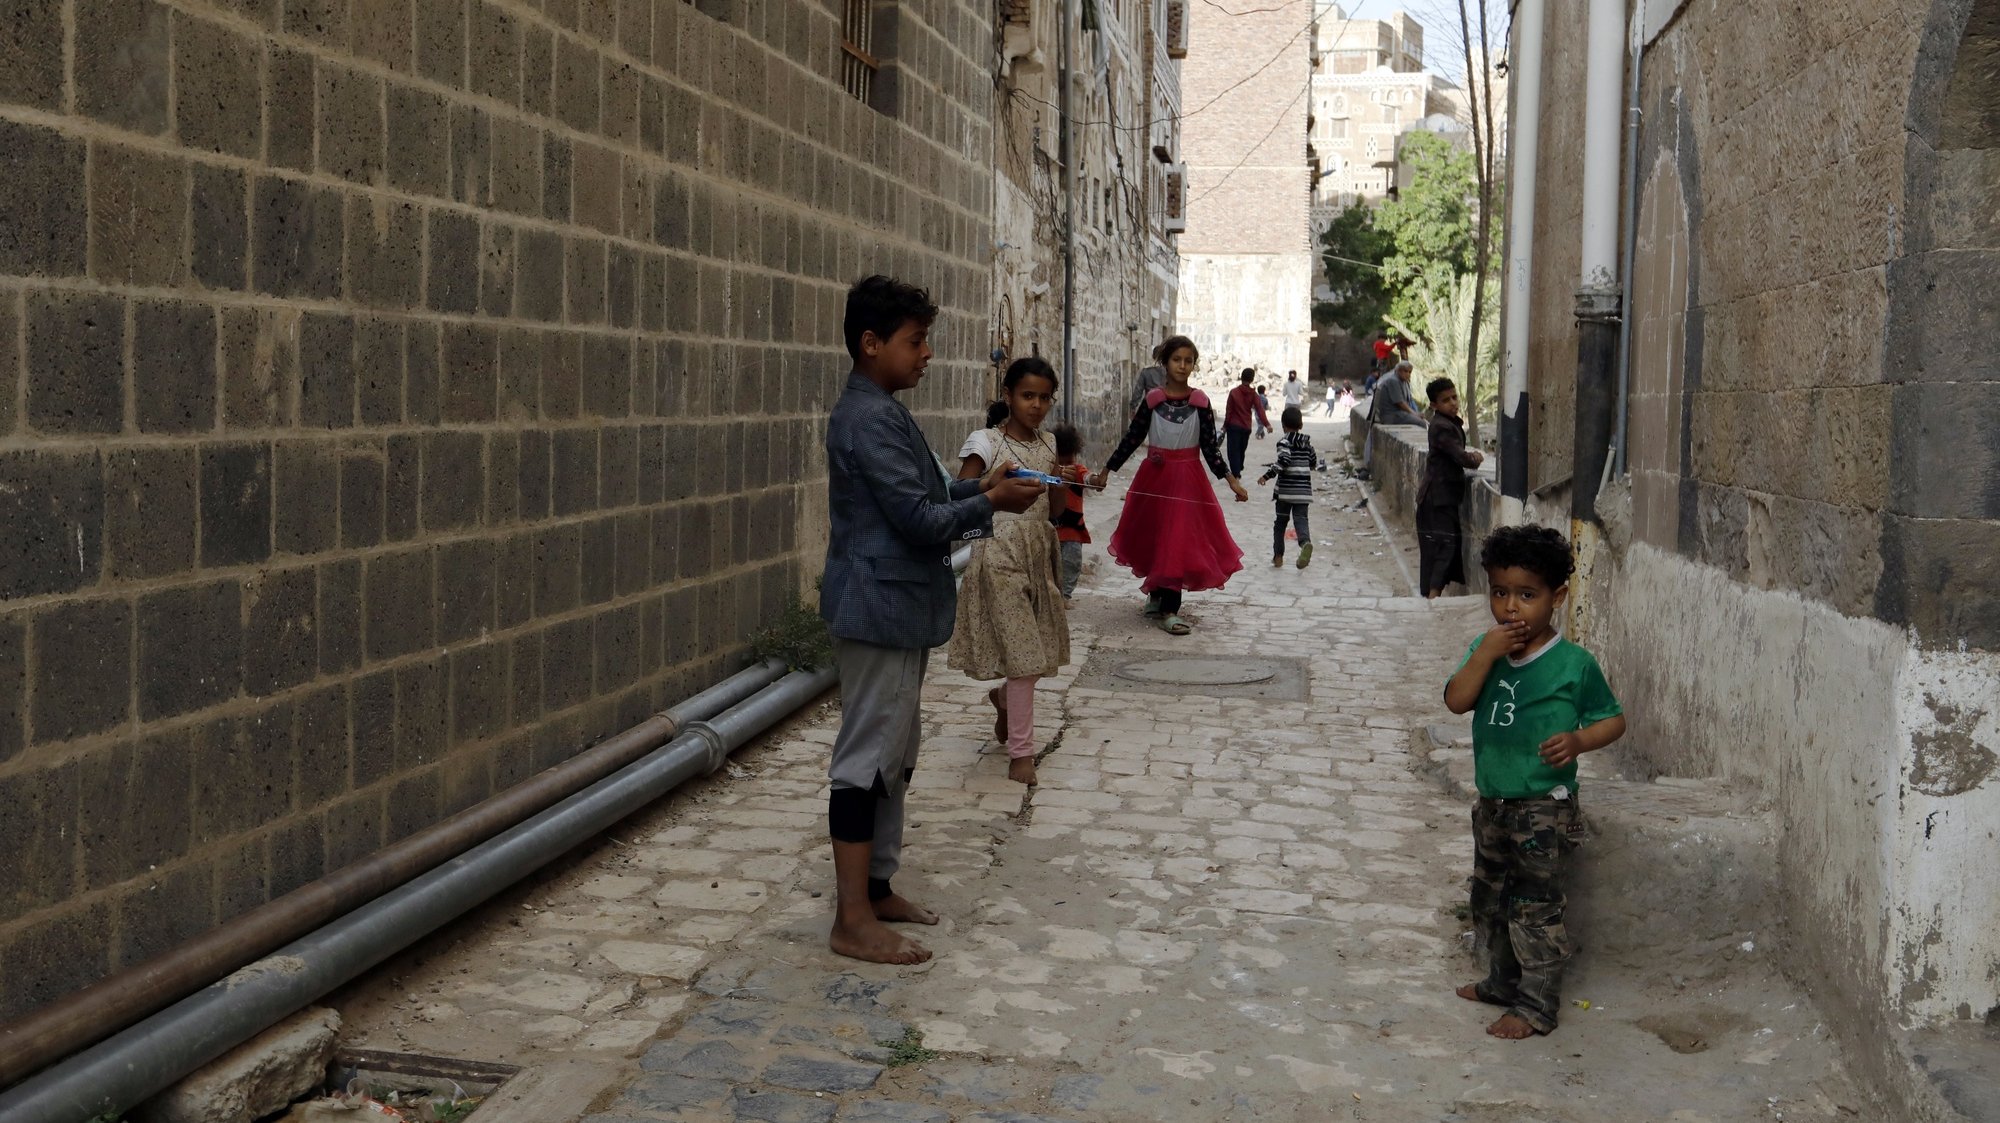 epa09223663 Yemeni children play at an alley in the old city of Sana’a, Yemen, 23 May 2021. The old city of Sana&#039;a is one of the oldest continuously-inhabited cities in the world. It was inscribed by UNESCO on the World Heritage List in 1986. It is made up of more than 6,000 buildings including its distinctive multi-story tower houses.  EPA/YAHYA ARHAB